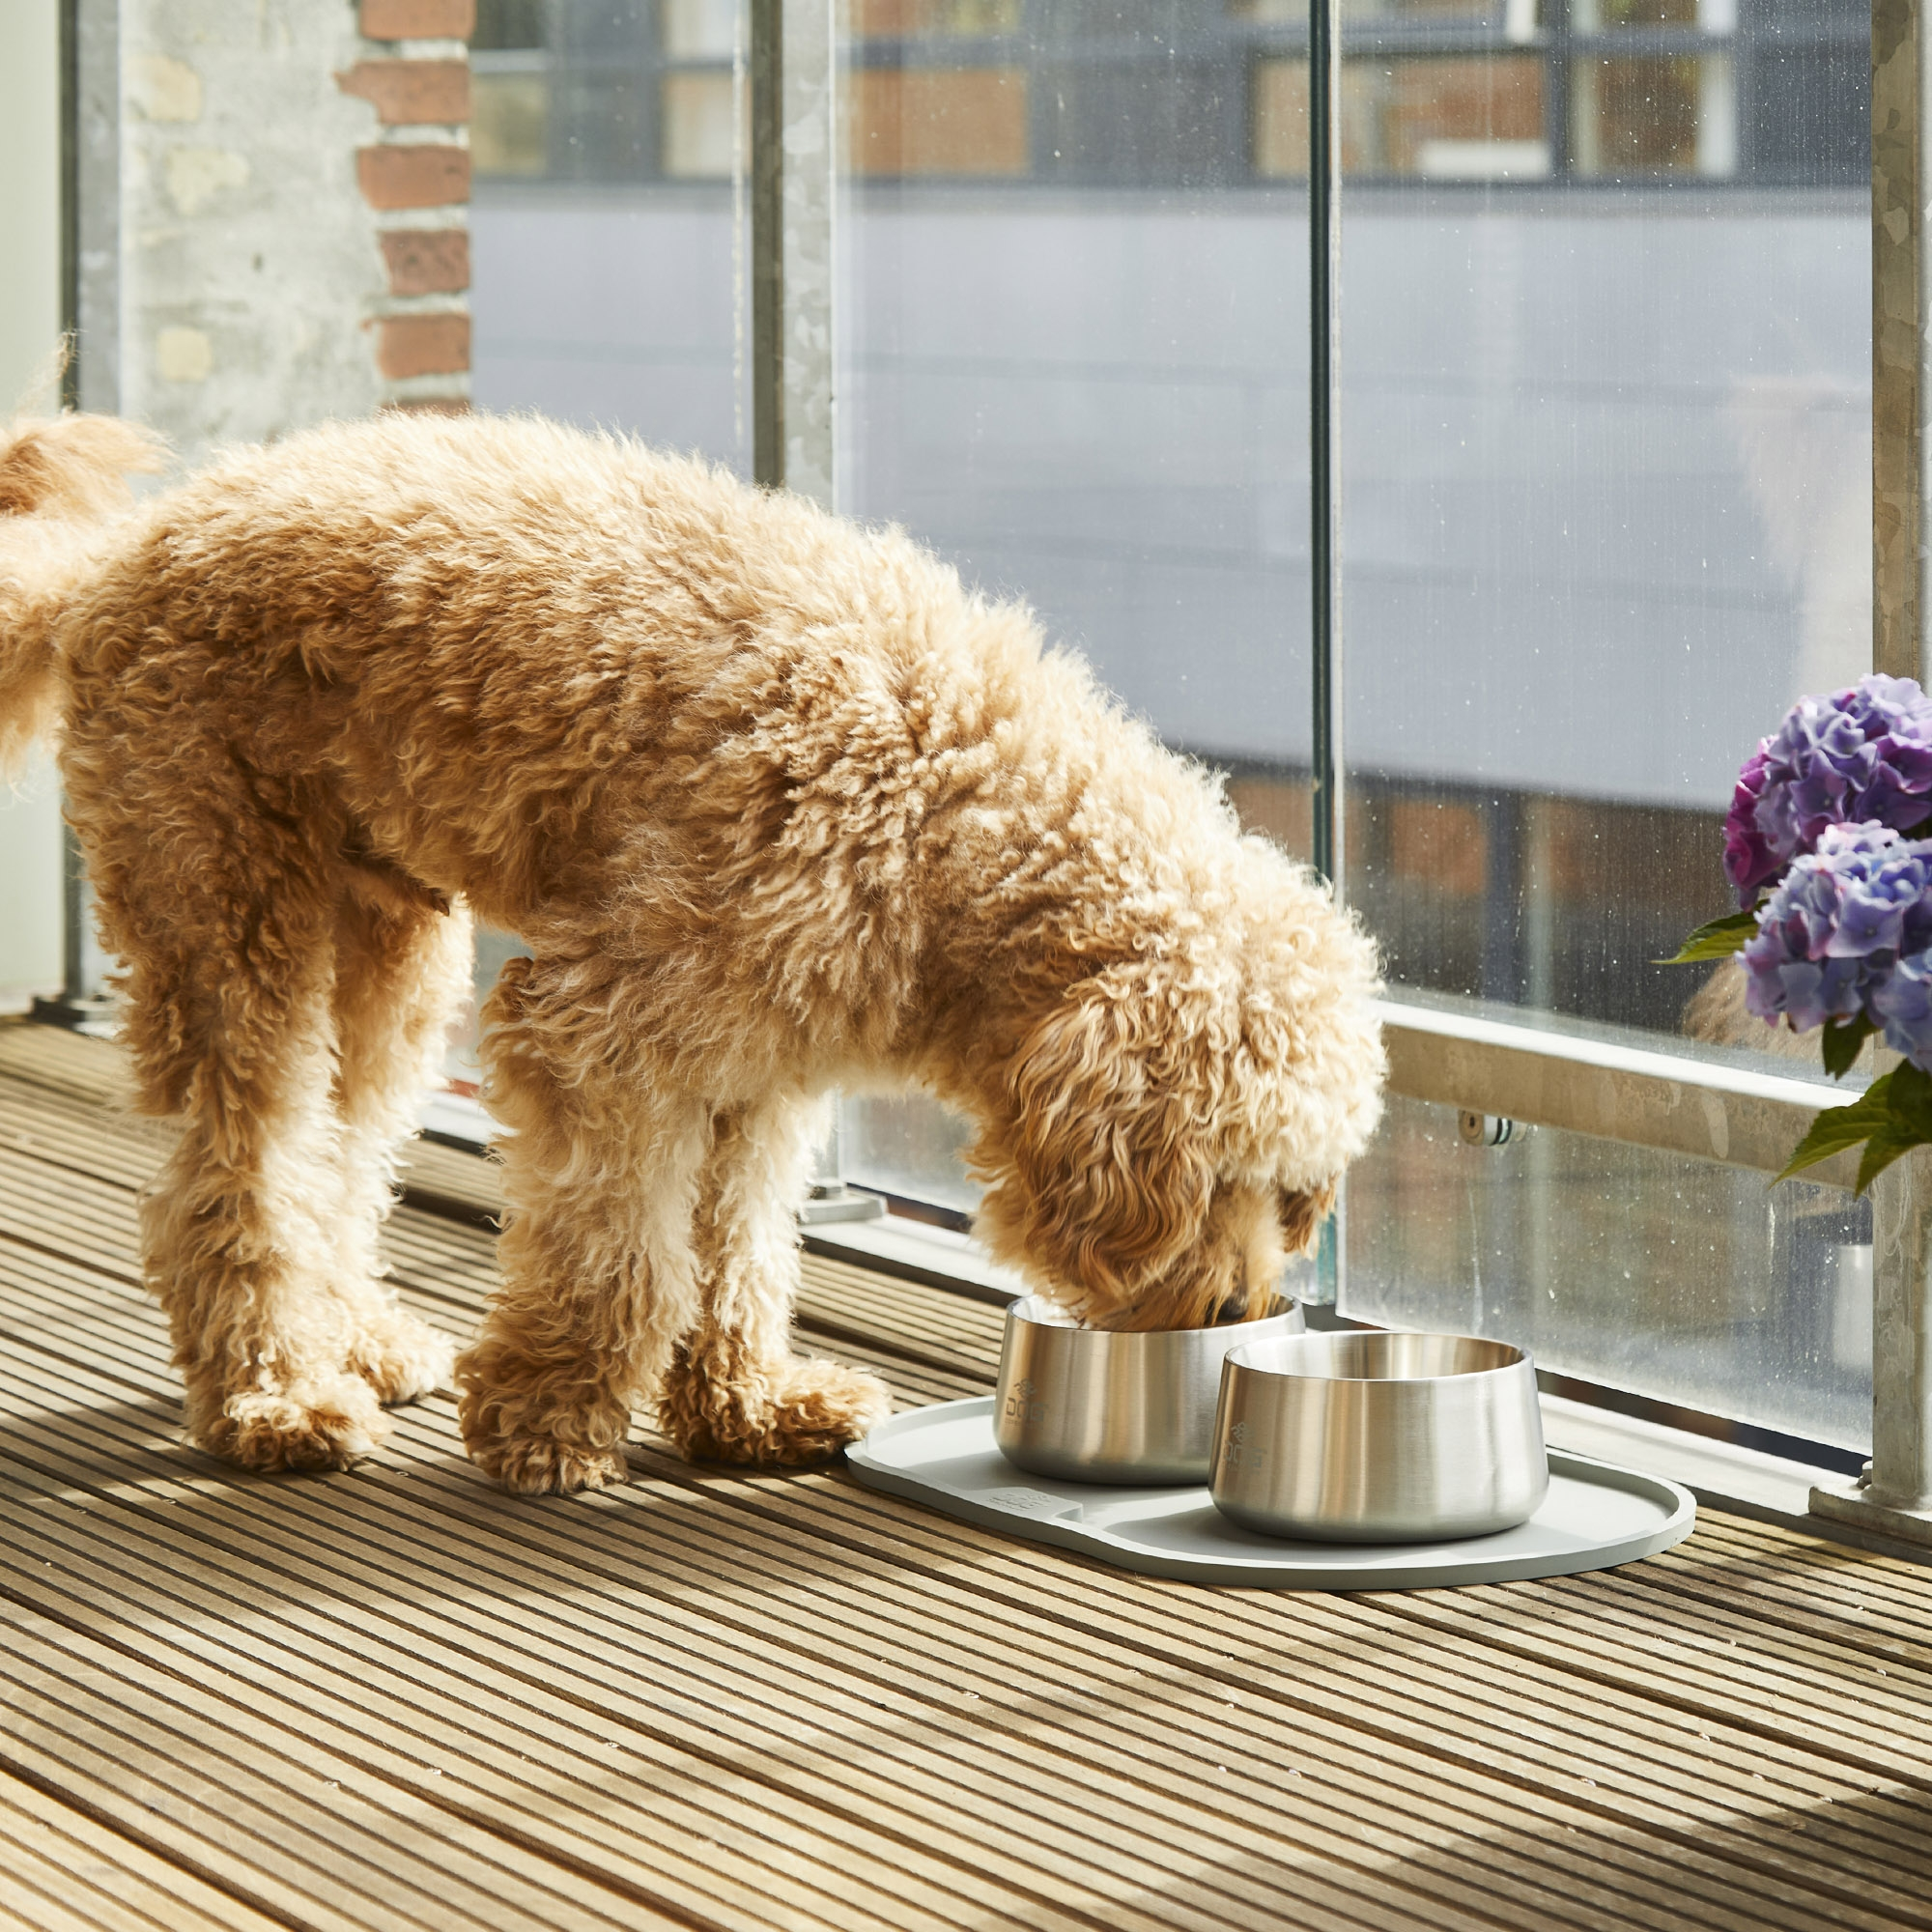 Compliment your home decor with these gorgeous indoor pet accessories!